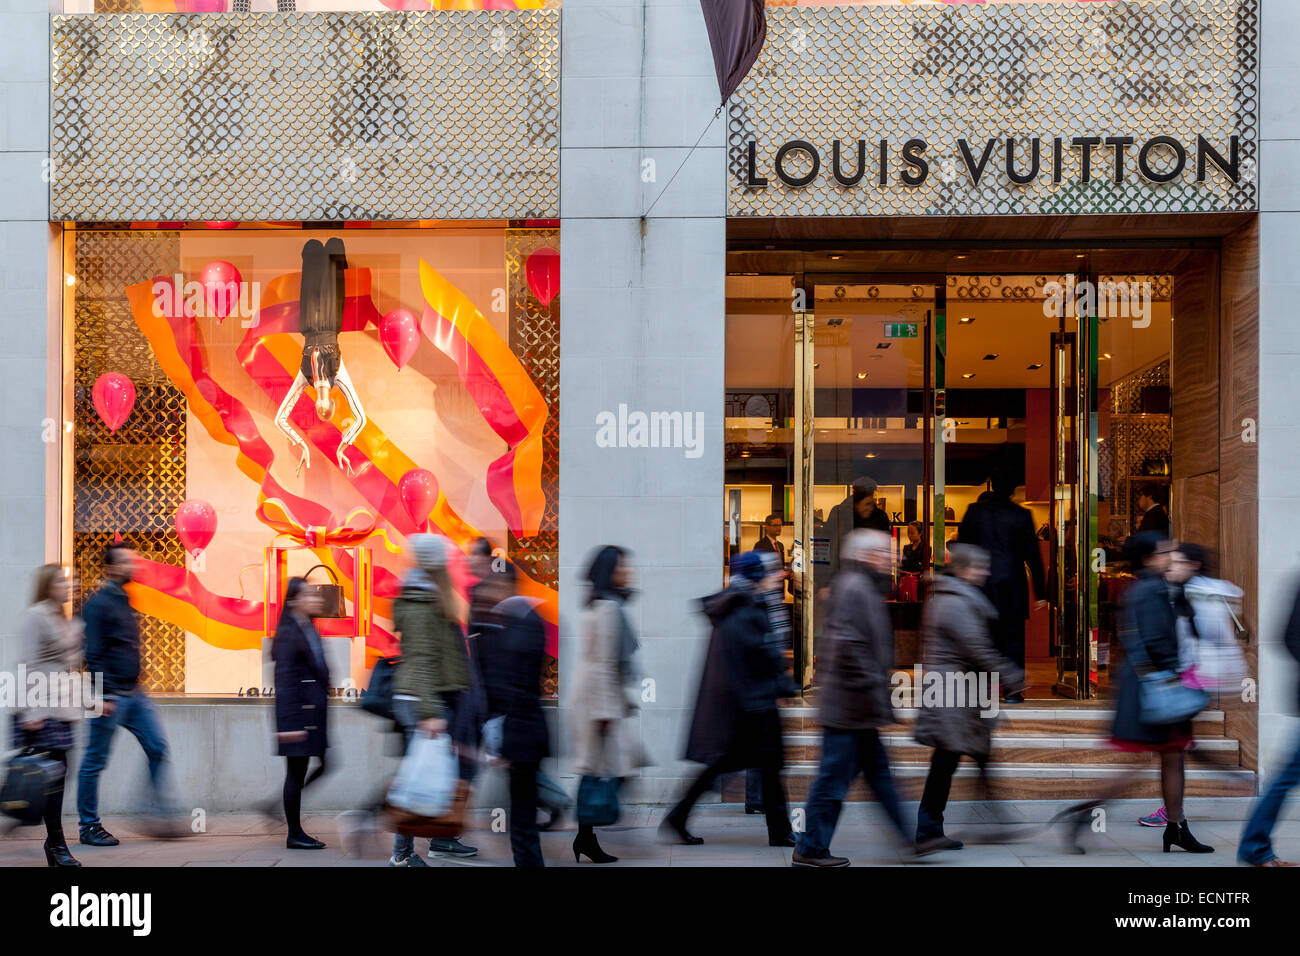 The Louis Vuitton Store In New Bond Street, London, England Stock